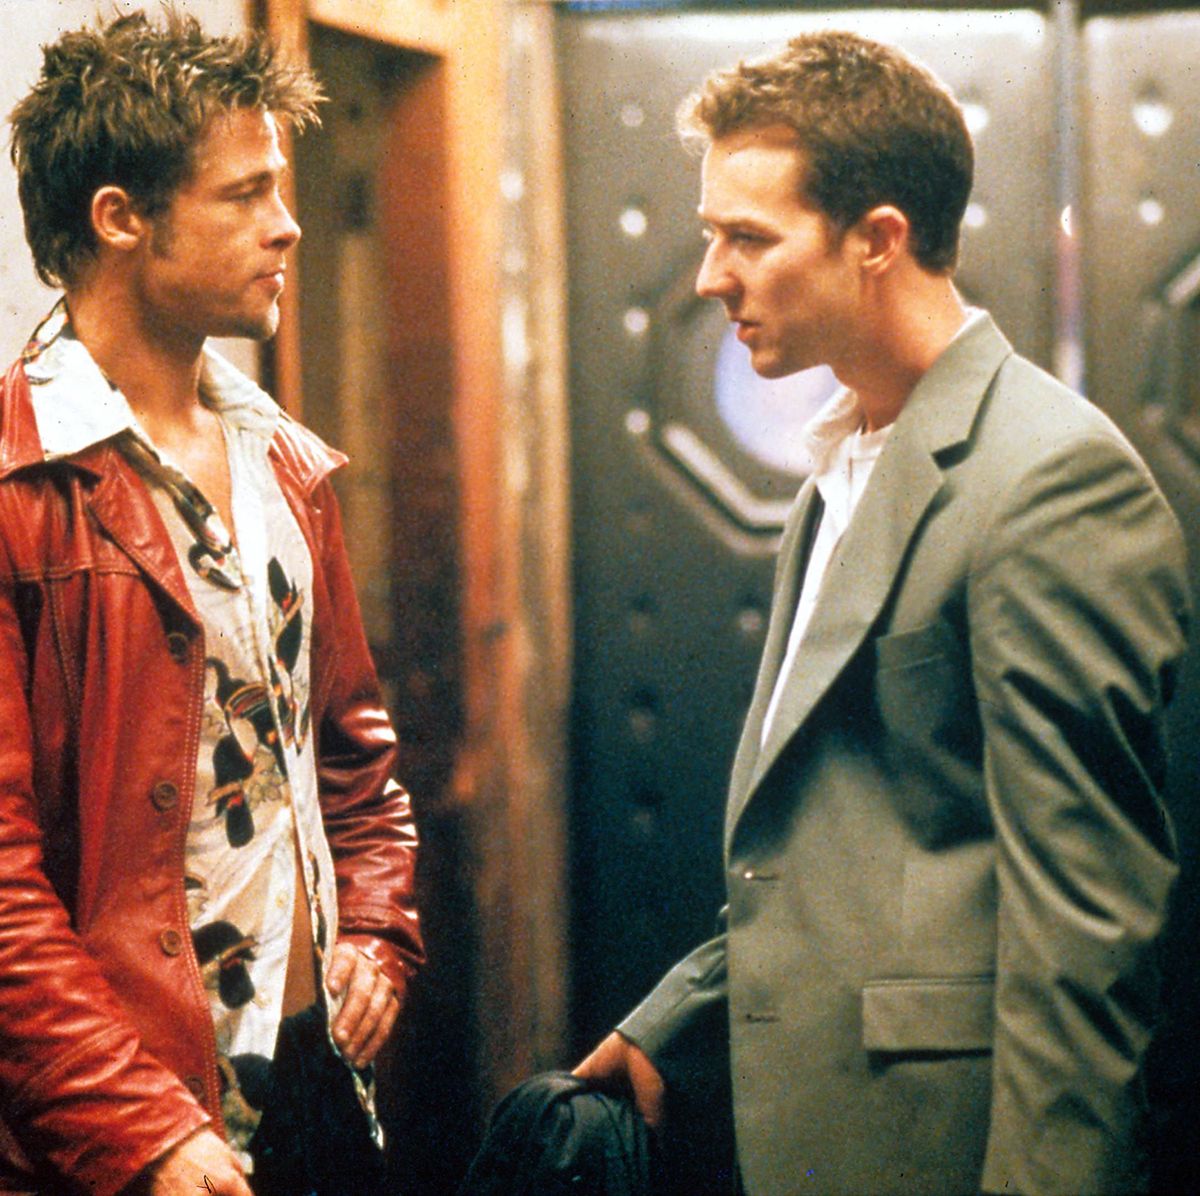 FIGHT CLUB: TYLER DURDEN'S FLAMBOYANT WARDROBE] Fight Club is an odd yet  exhilarating cinematic experiment. The movie depicts a mystery…